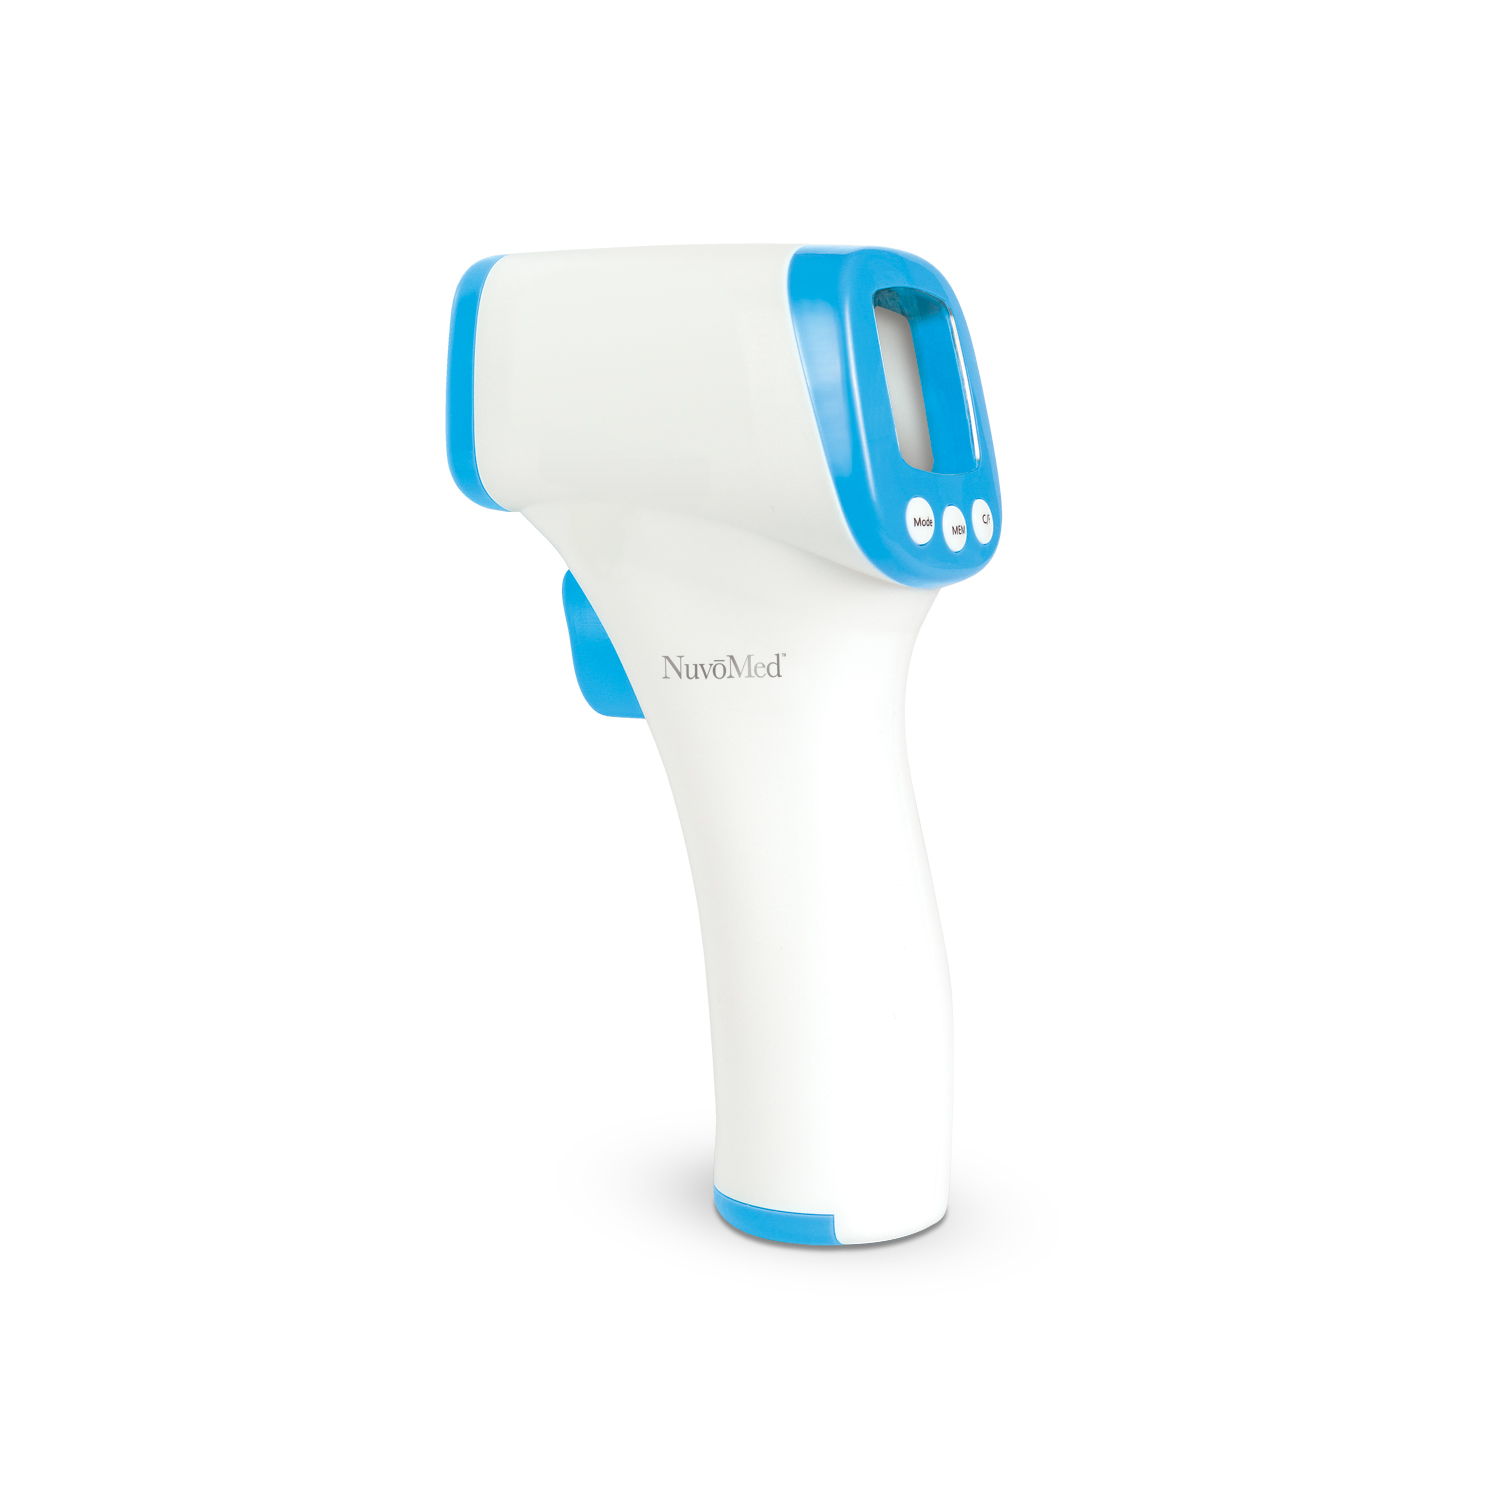 Eastwood Non-Contact Infrared Thermometer